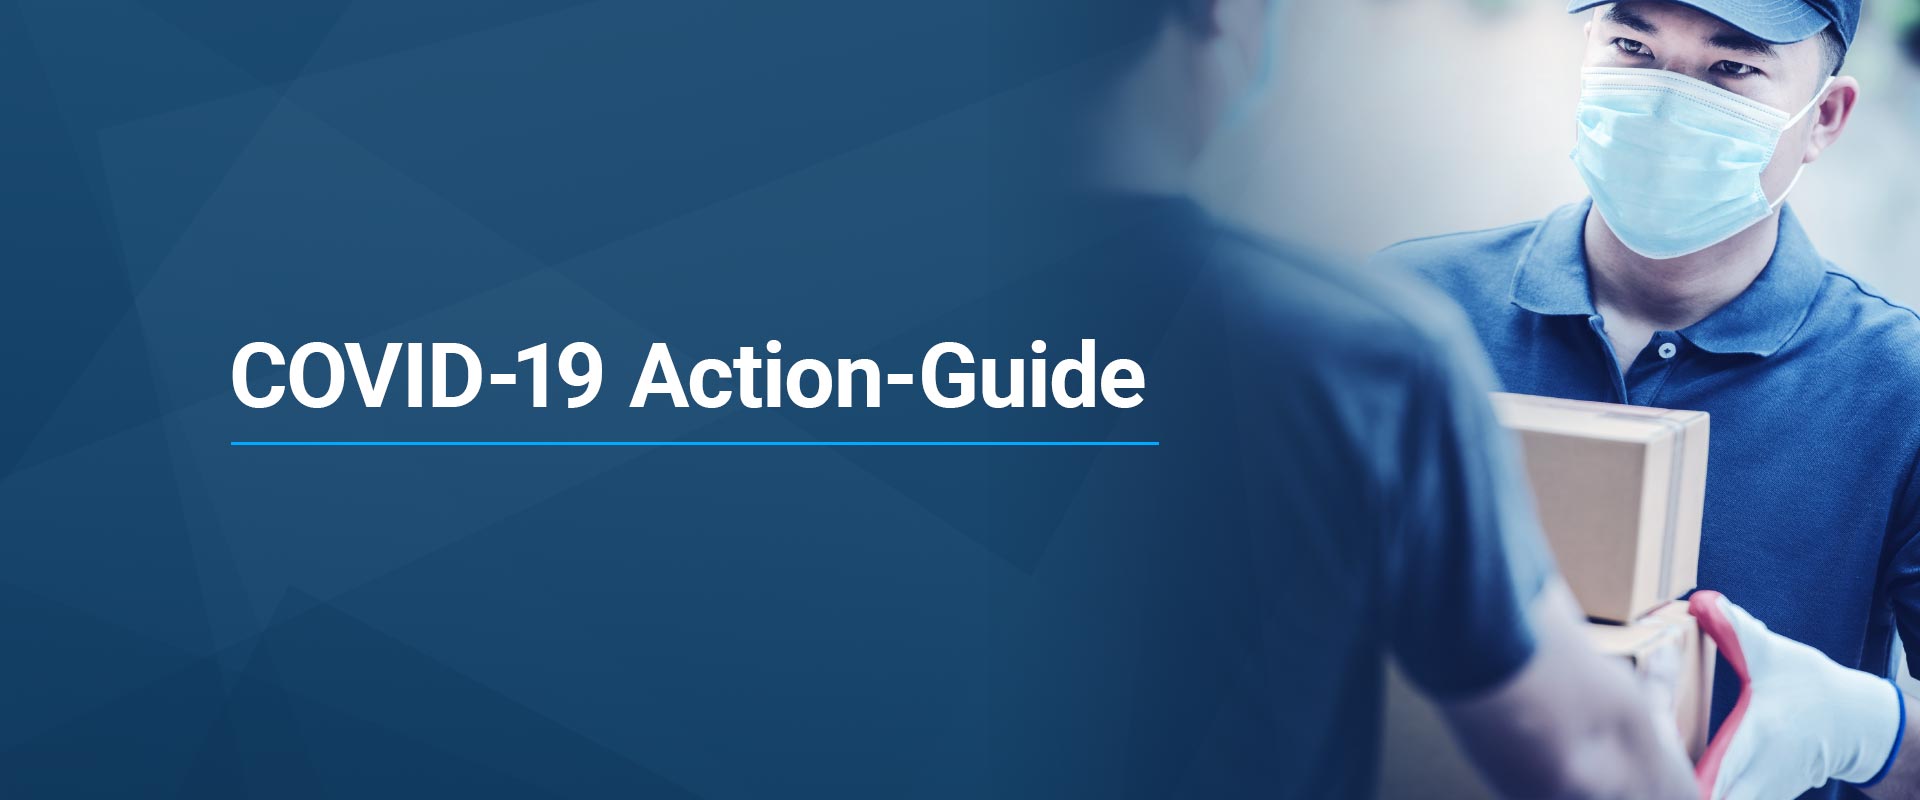 Covid-19 Action-Guide